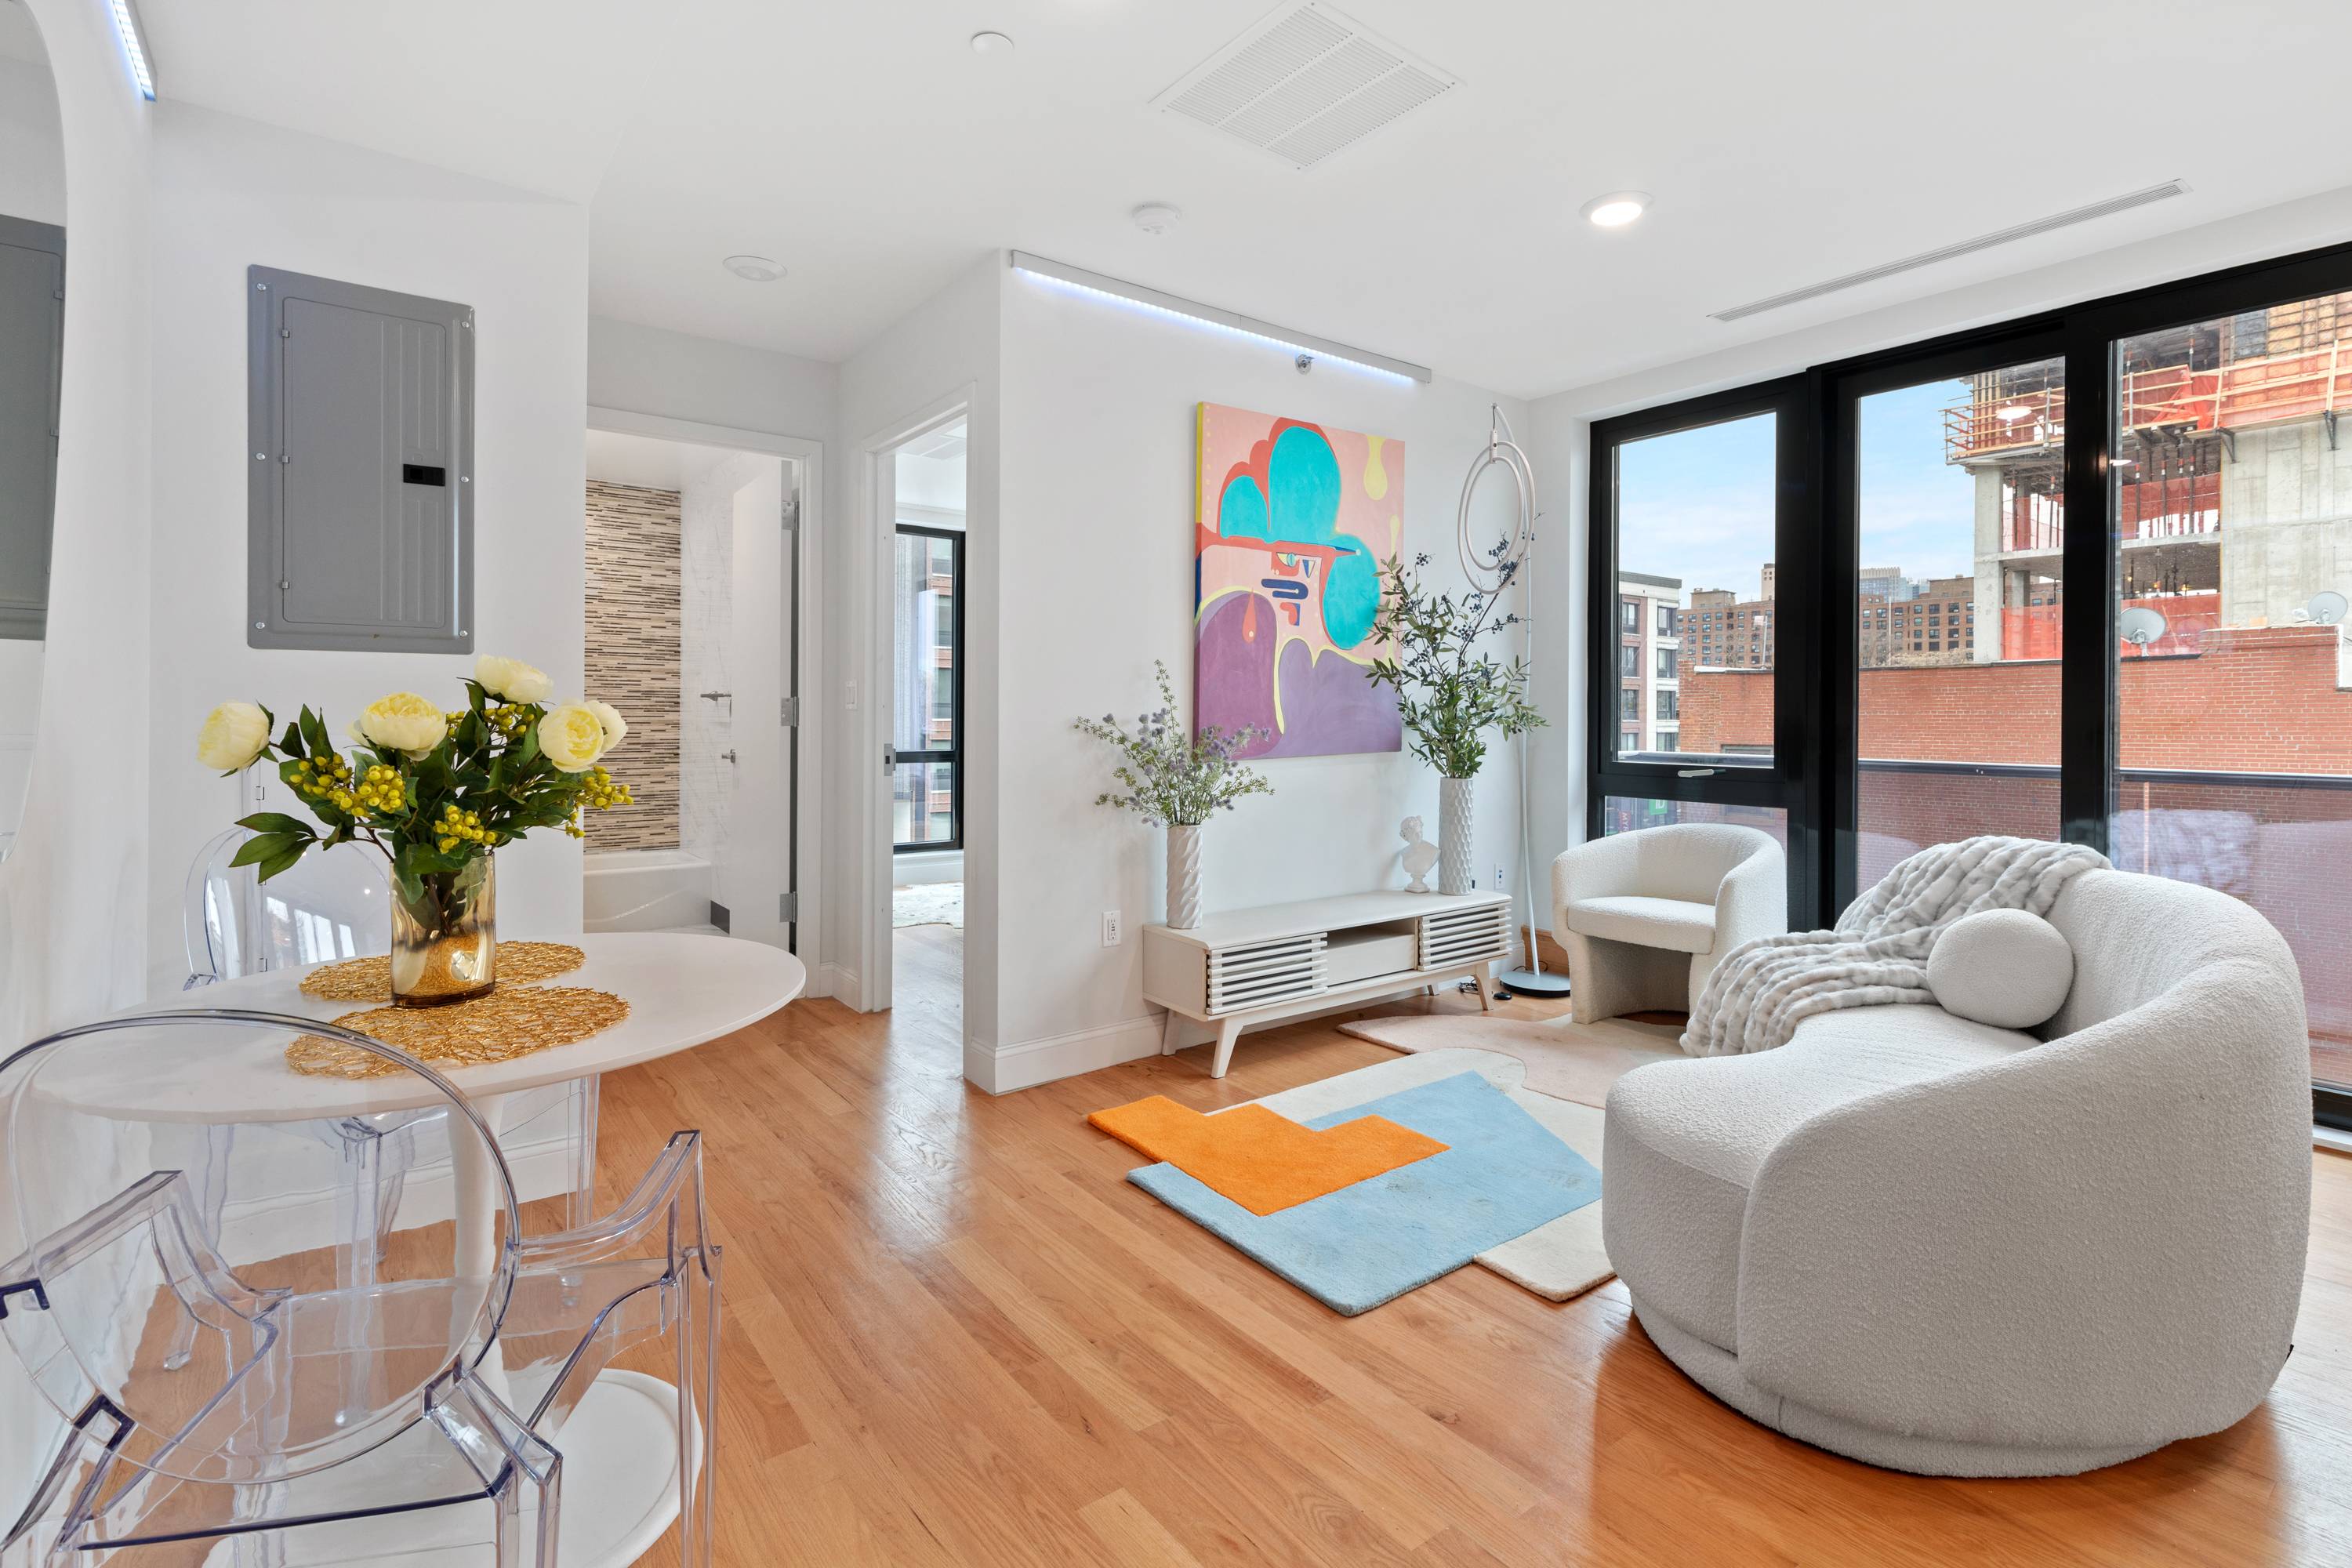 Designed to maximize space, fresh air, and natural light each home offers residents a contemporary indoor outdoor lifestyle in the heart of charming Clinton Hill.